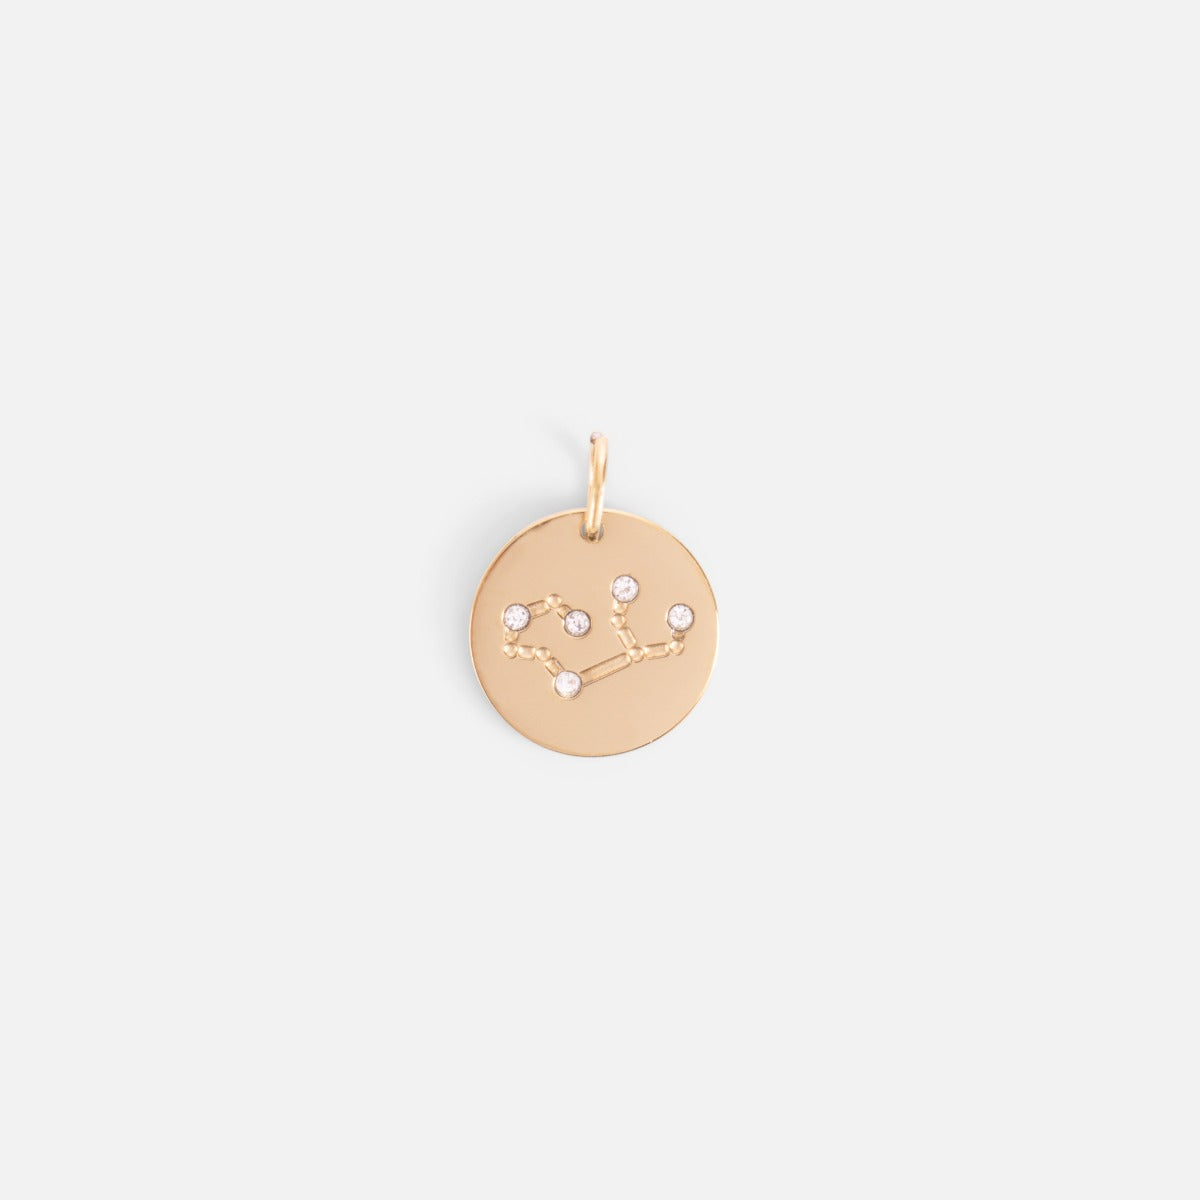 Small golden charm engraved with the zodiac constellation "virgo"